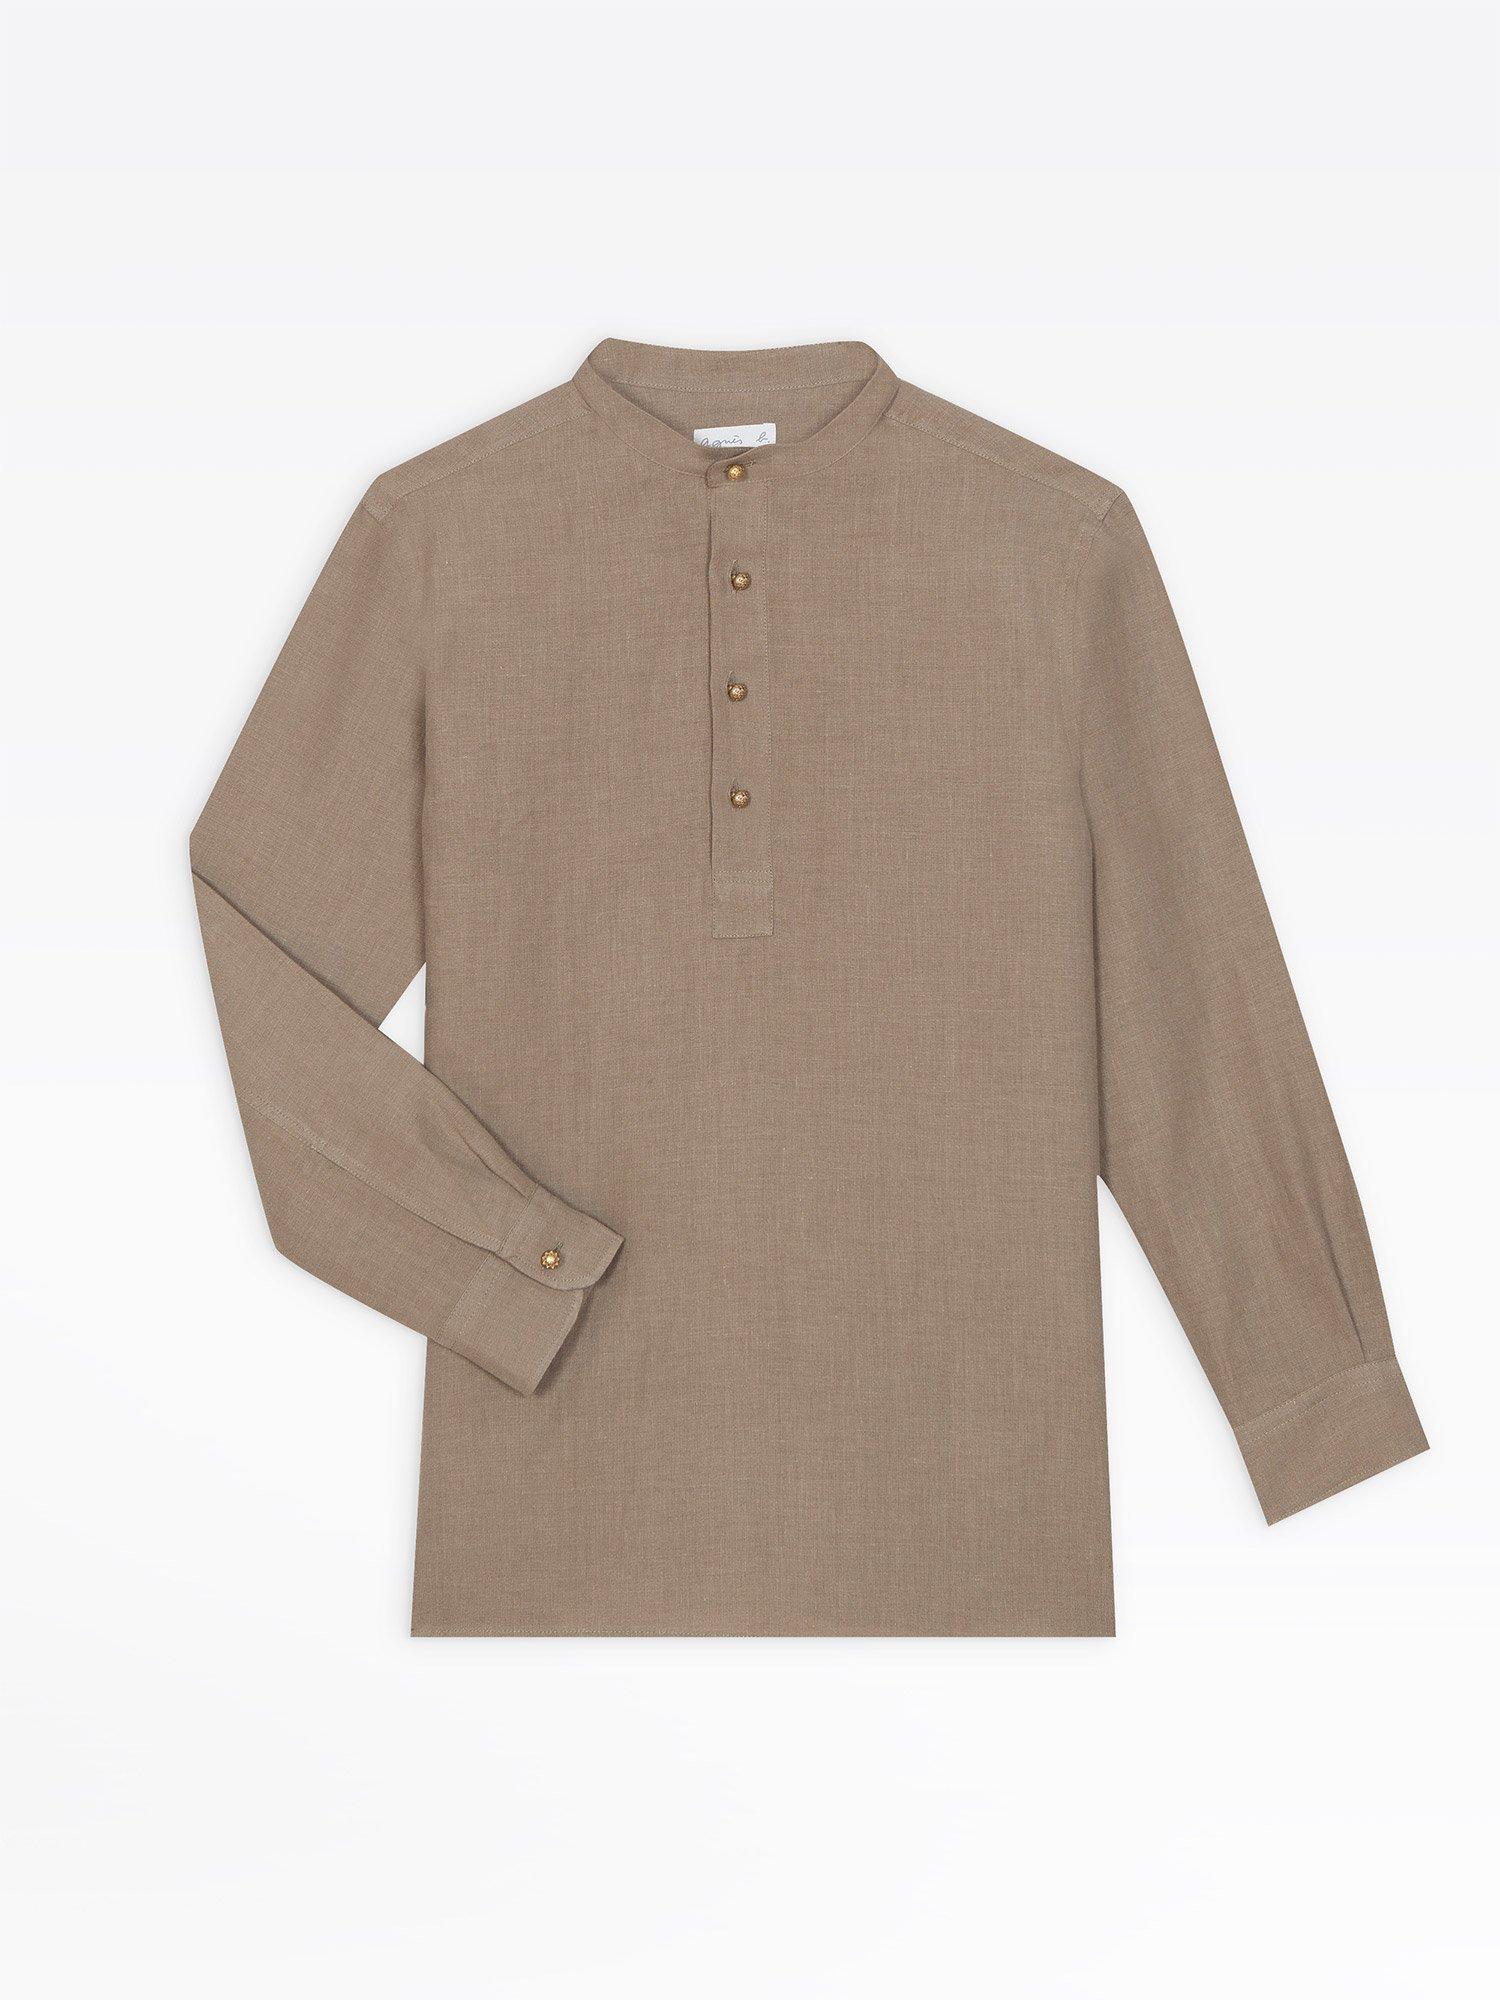 agnès b. Taupe Linen Tunic Blouse in Brown - Lyst